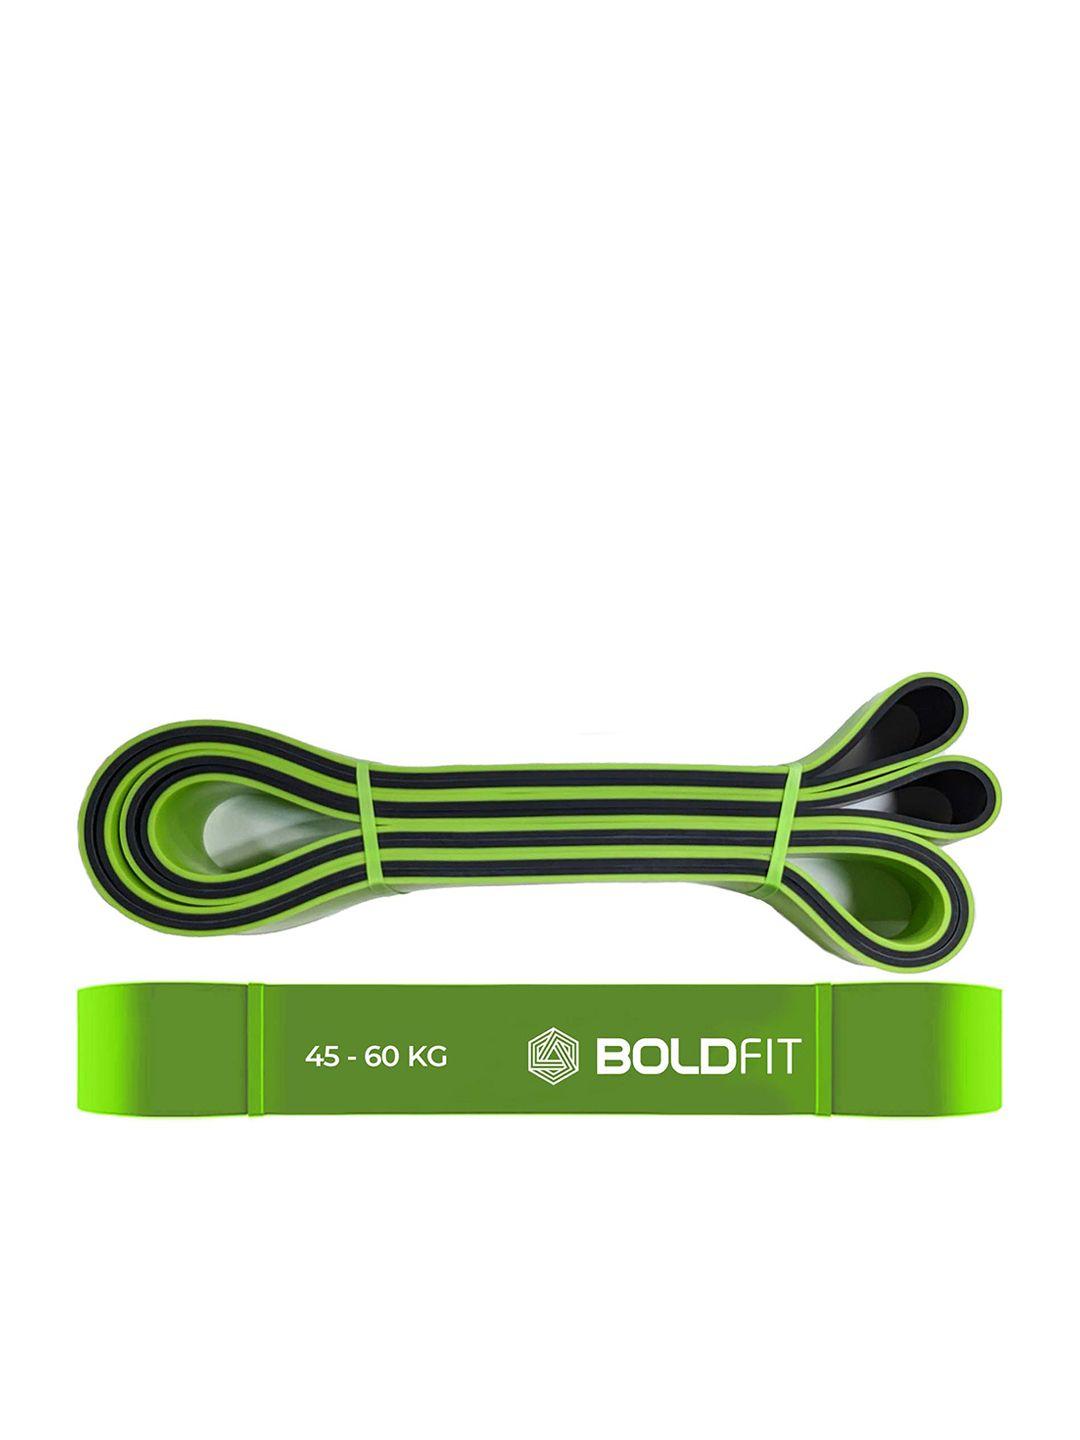 boldfit green  solid heavy resistance bands